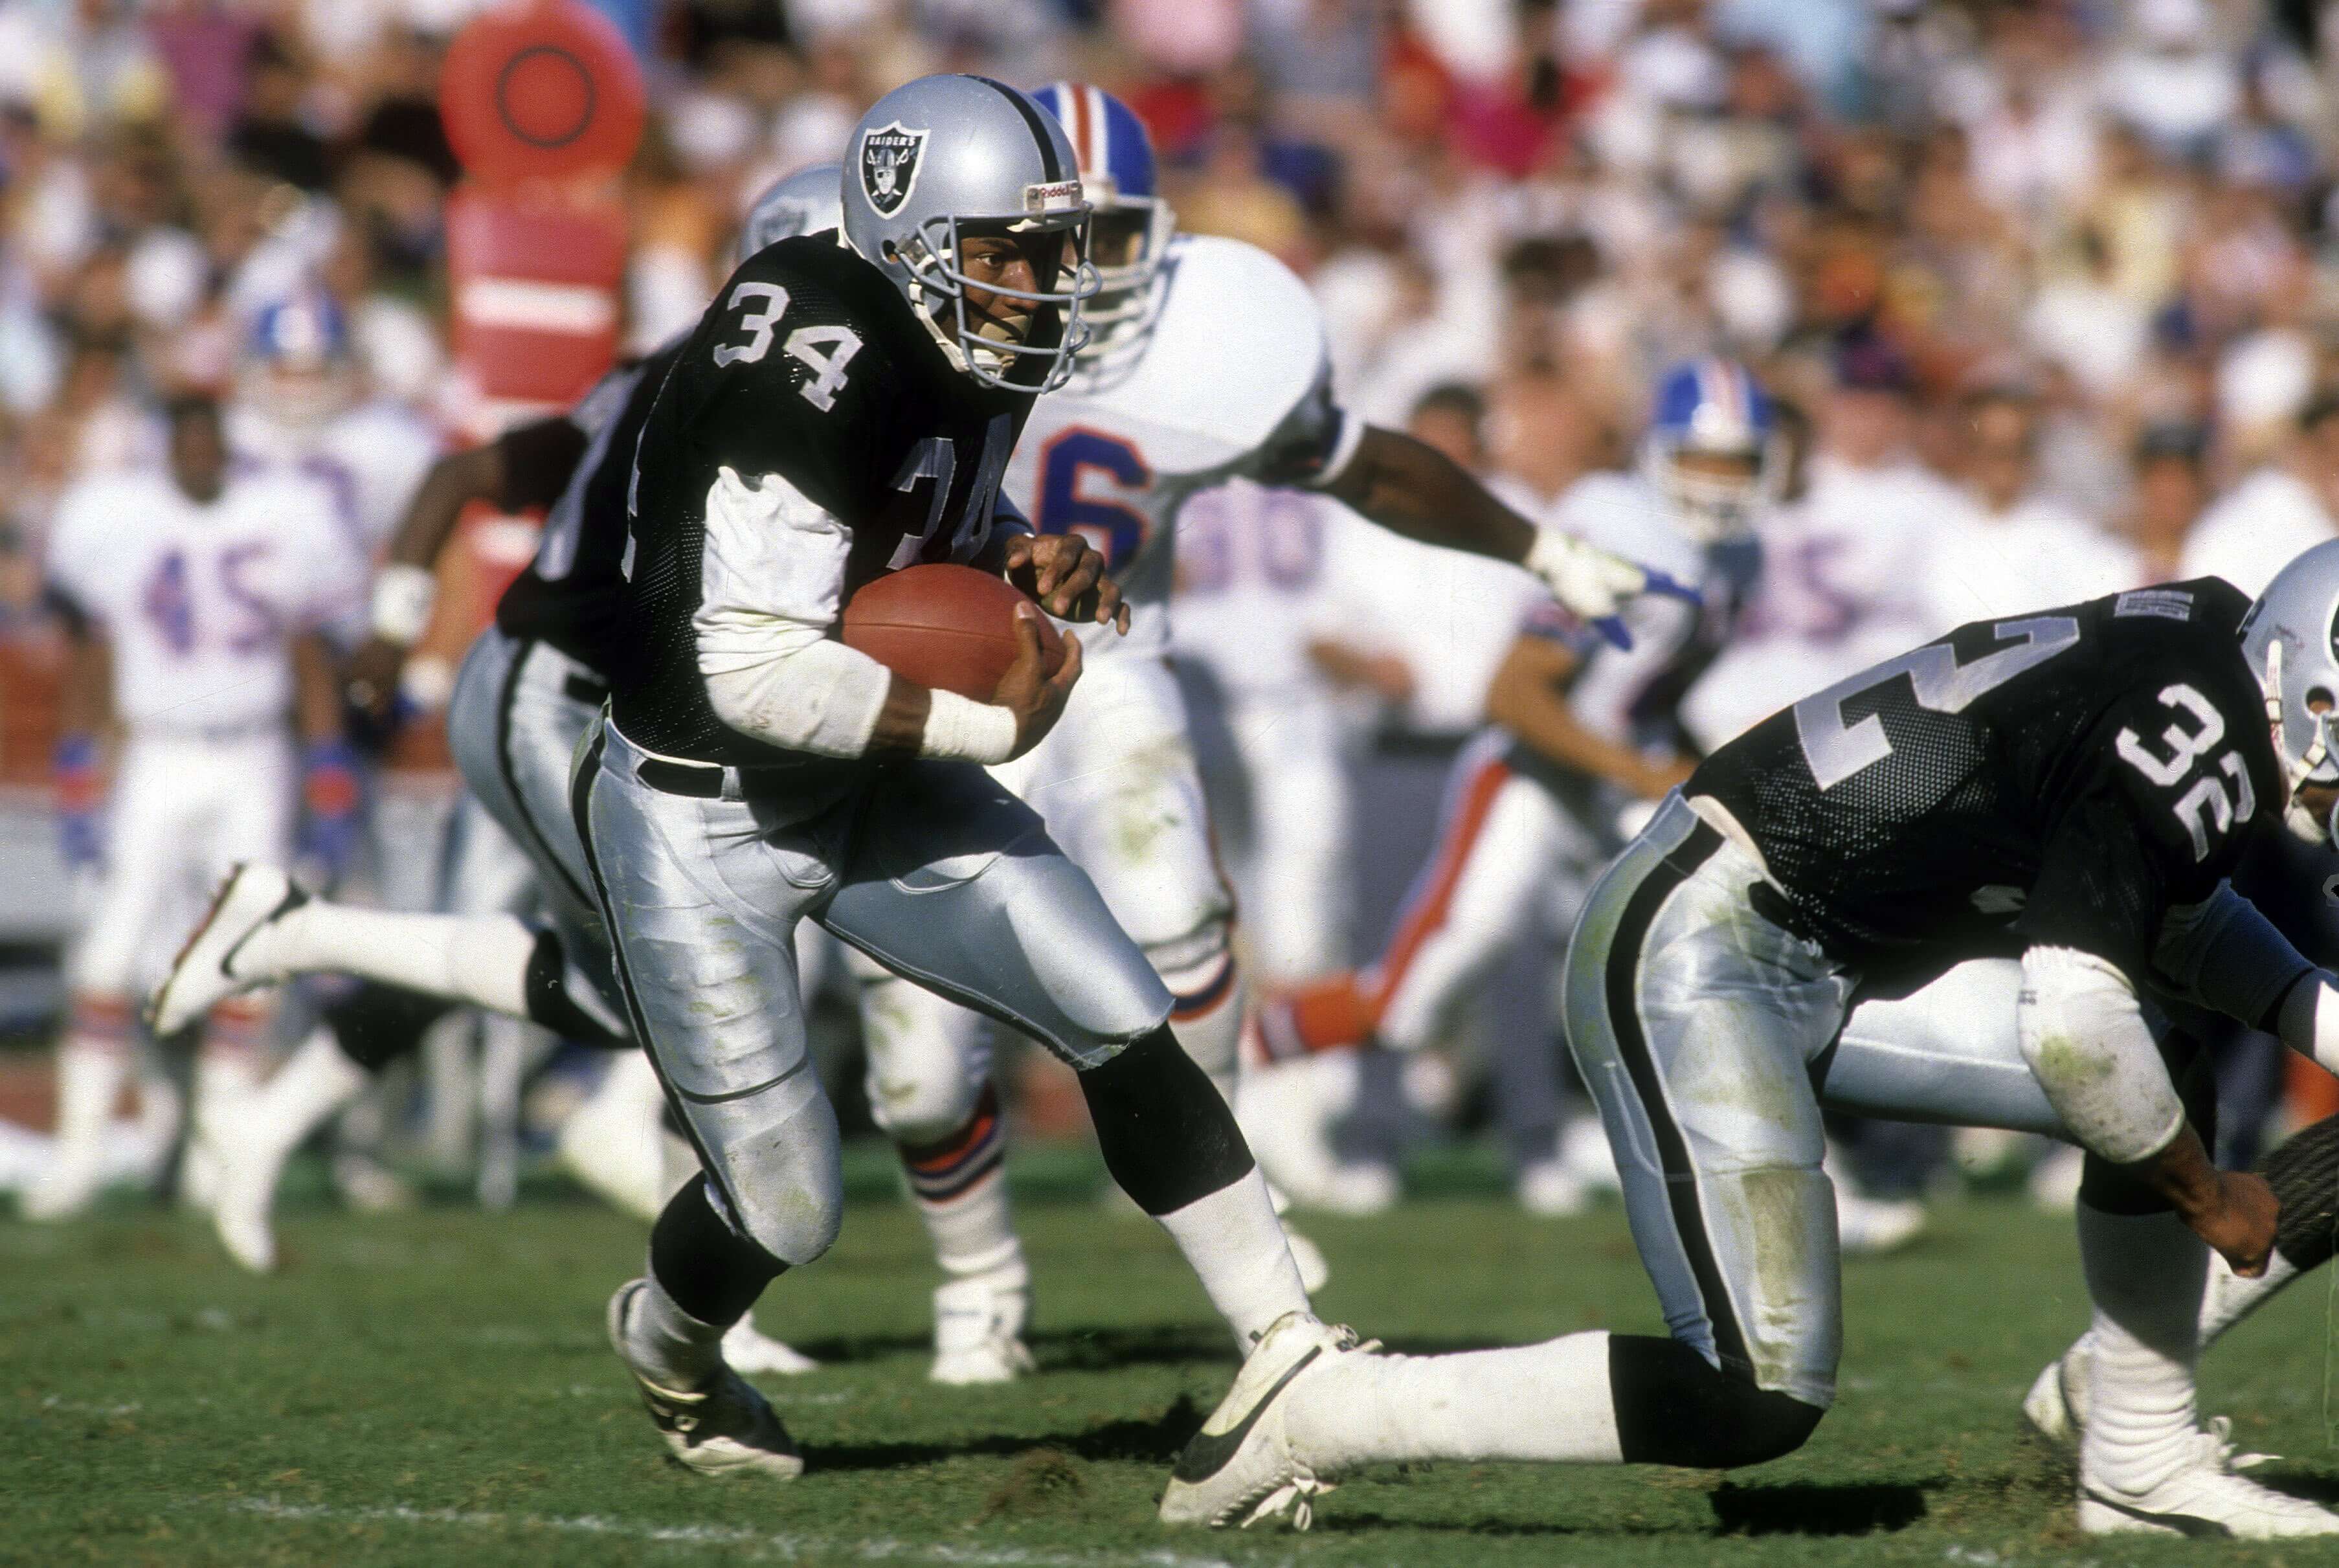 Running back Bo Jackson of the Los Angeles Raiders carries the ball against the Denver Broncos.